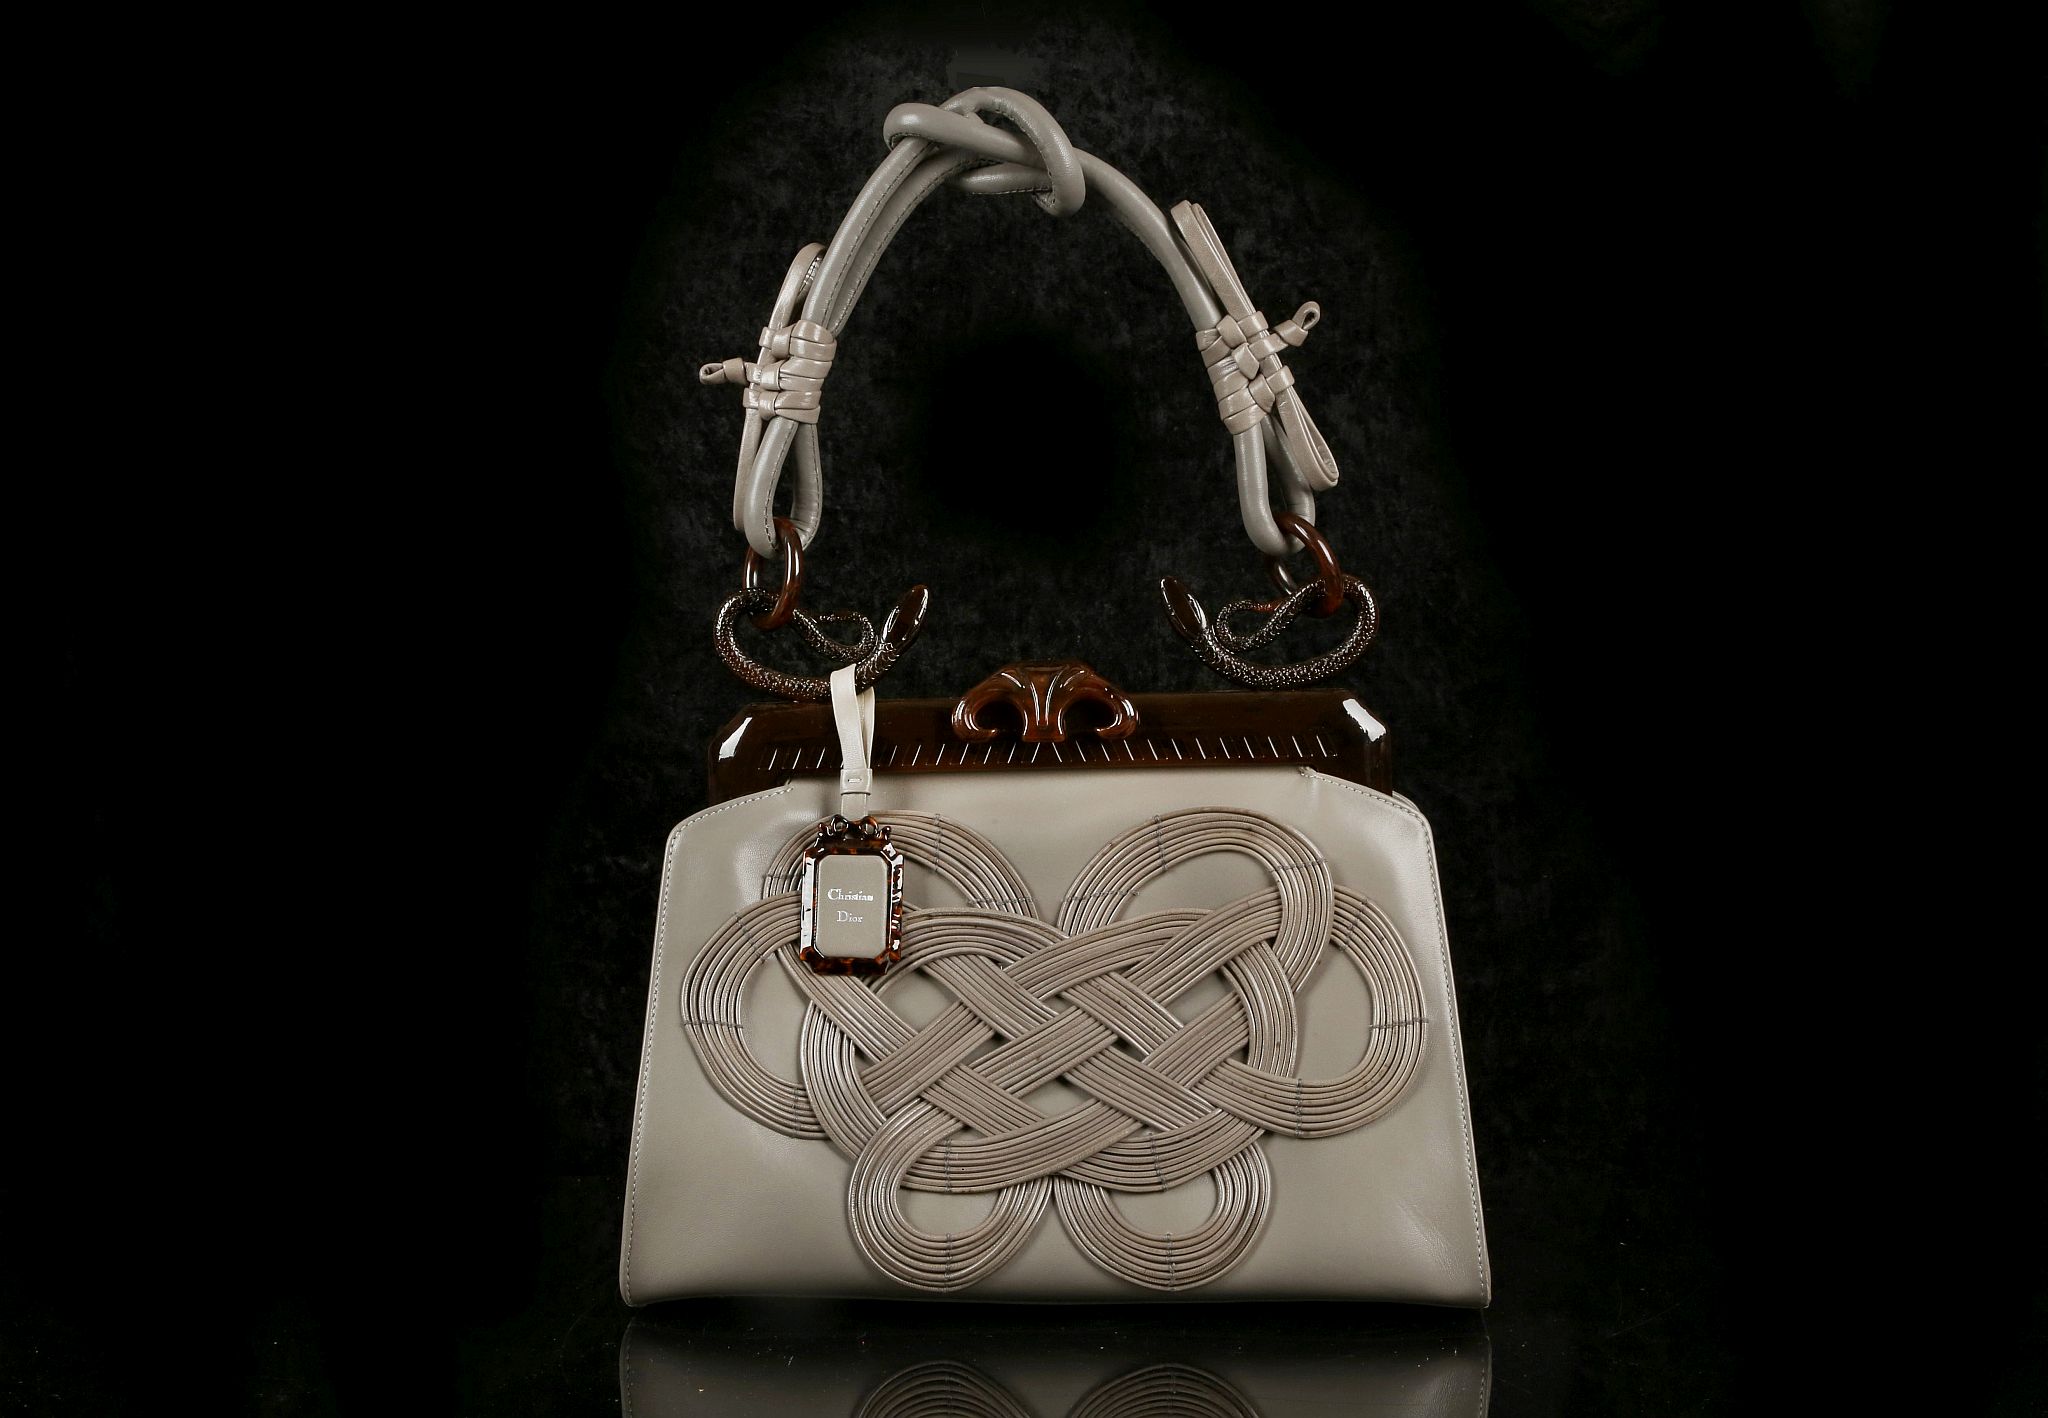 CHRISTIAN DIOR 1947 KNOT SAMOURAI HANDBAG, limited edition and numbered 0531, grey lambskin with